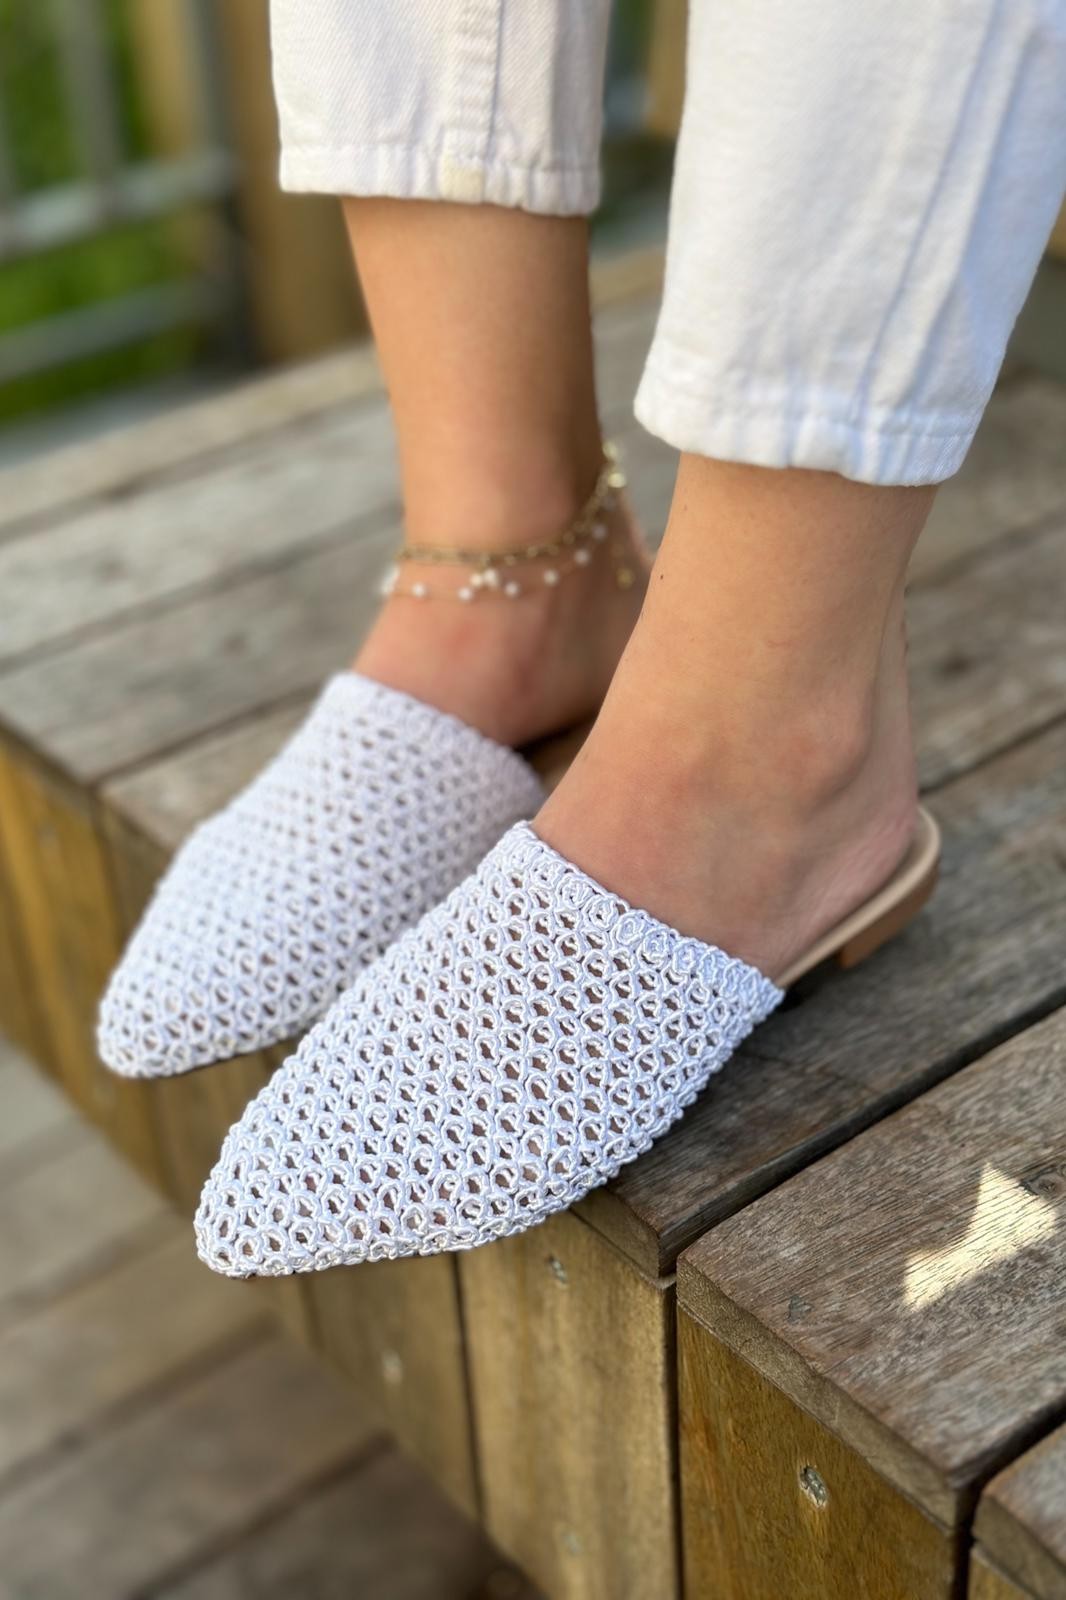 Tefons Knitting Woman Slippers White